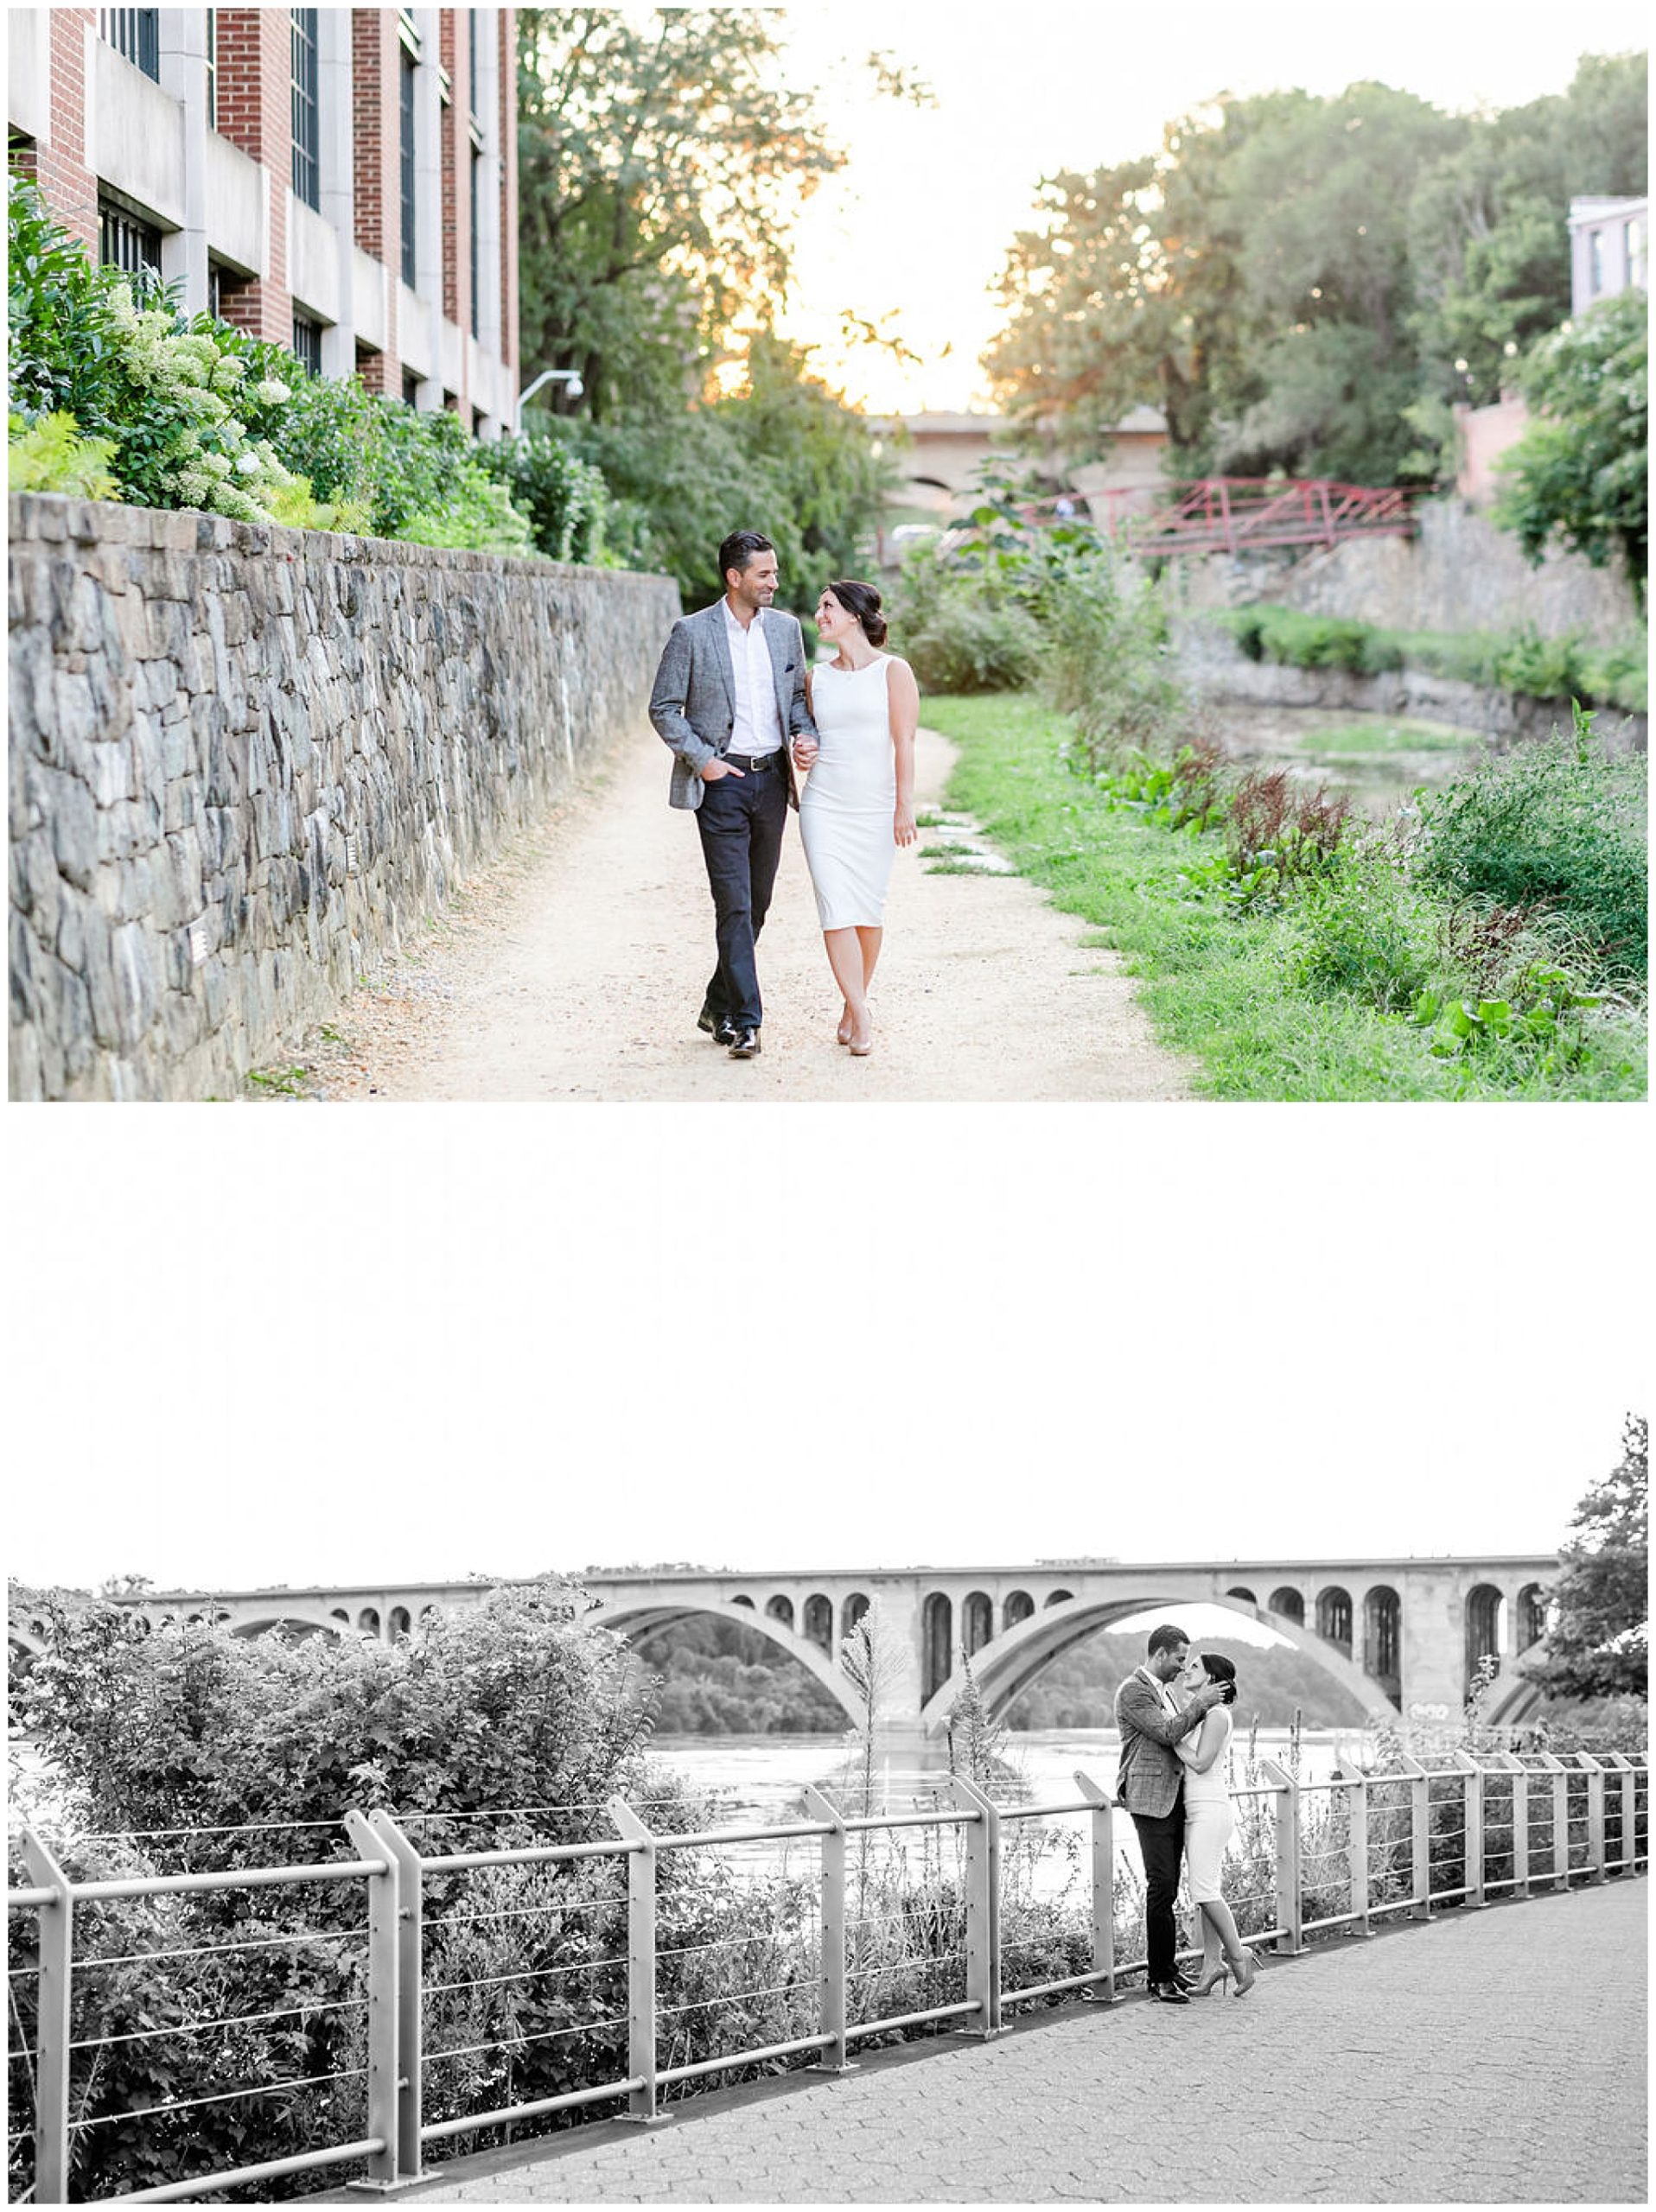 classic Georgetown engagement photos, Washington DC engagement photos, DC engagement photographer, Washington DC wedding photographer, classic engagement photos, white body con dress, semi-formal engagement photos, summer portraits, DC portraits, Rachel E.H. Photography, couple in front of bridge